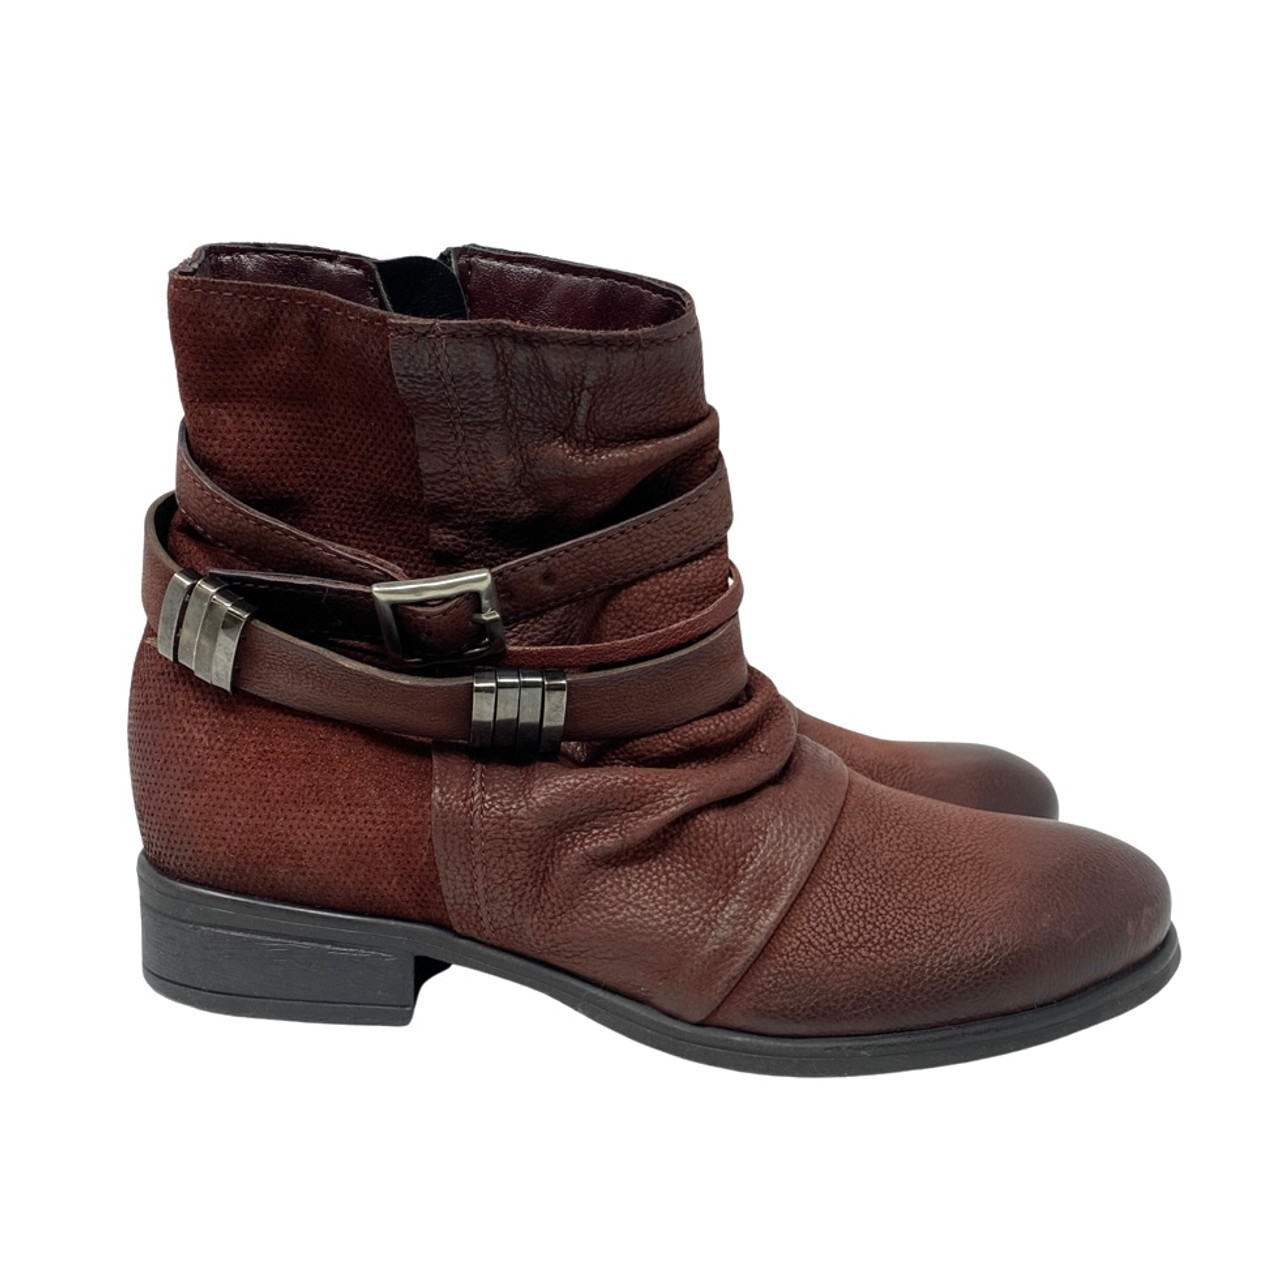 Miz Mooz Side Buckle Leather Ankle Boots